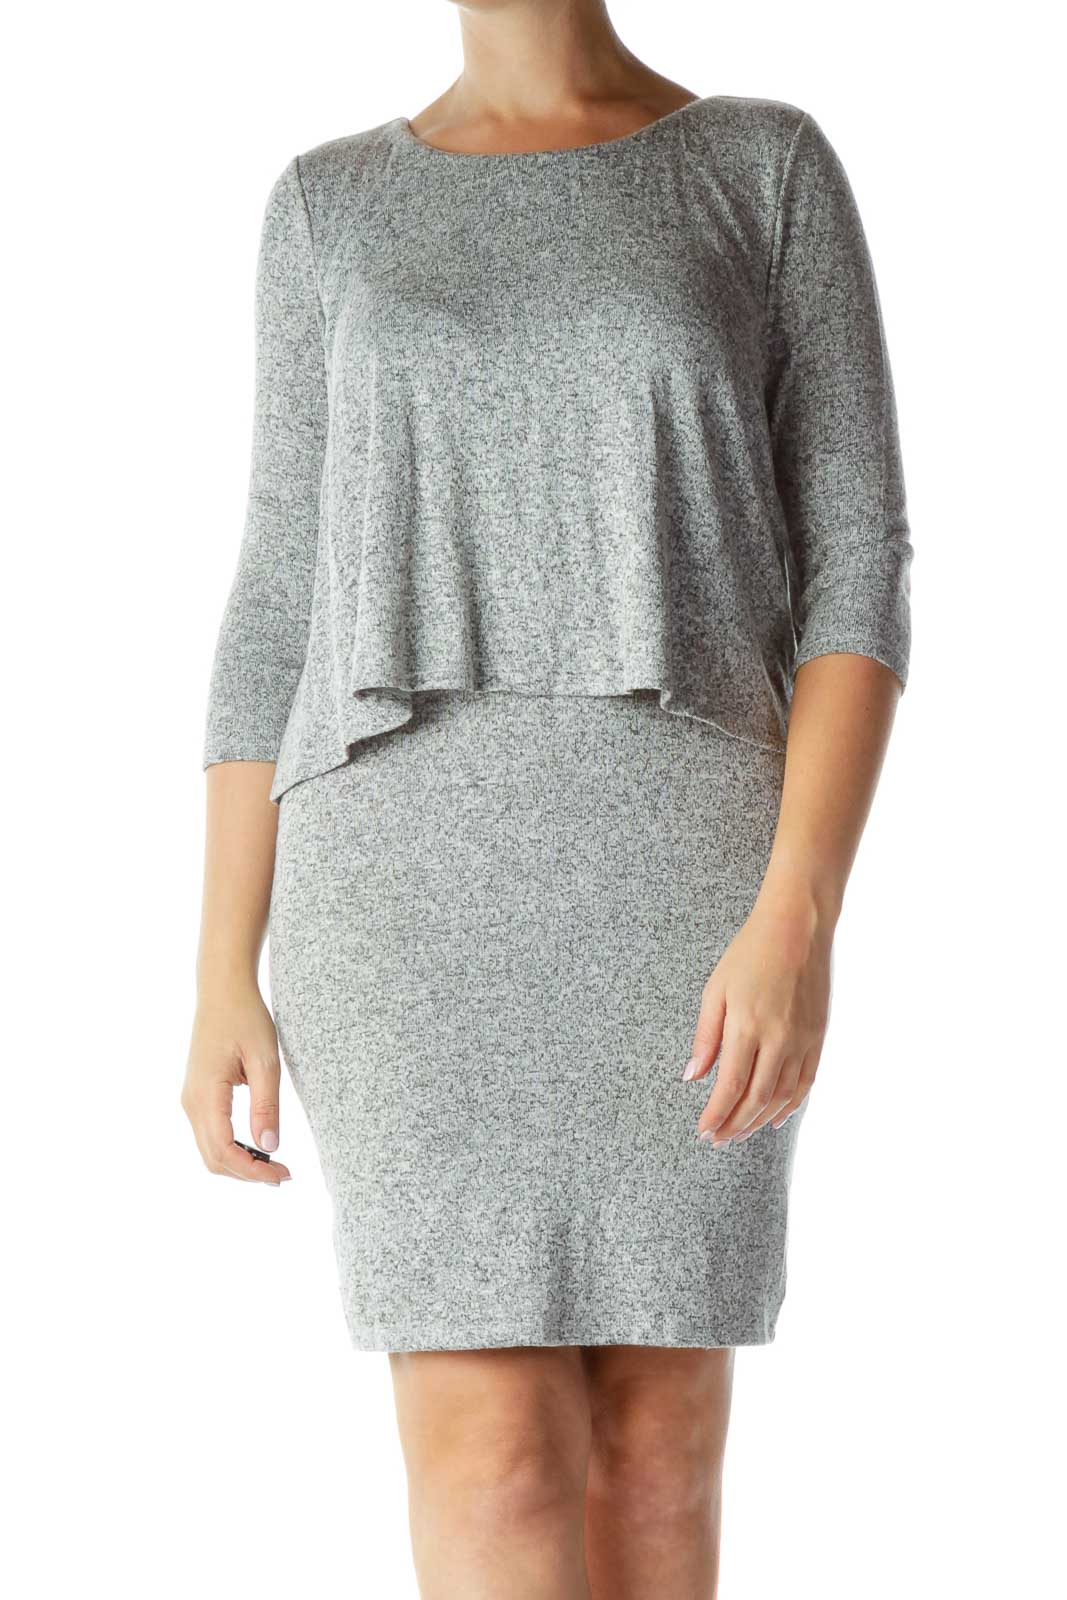 Heather Gray 3/4-Sleeve Knit Dress Front